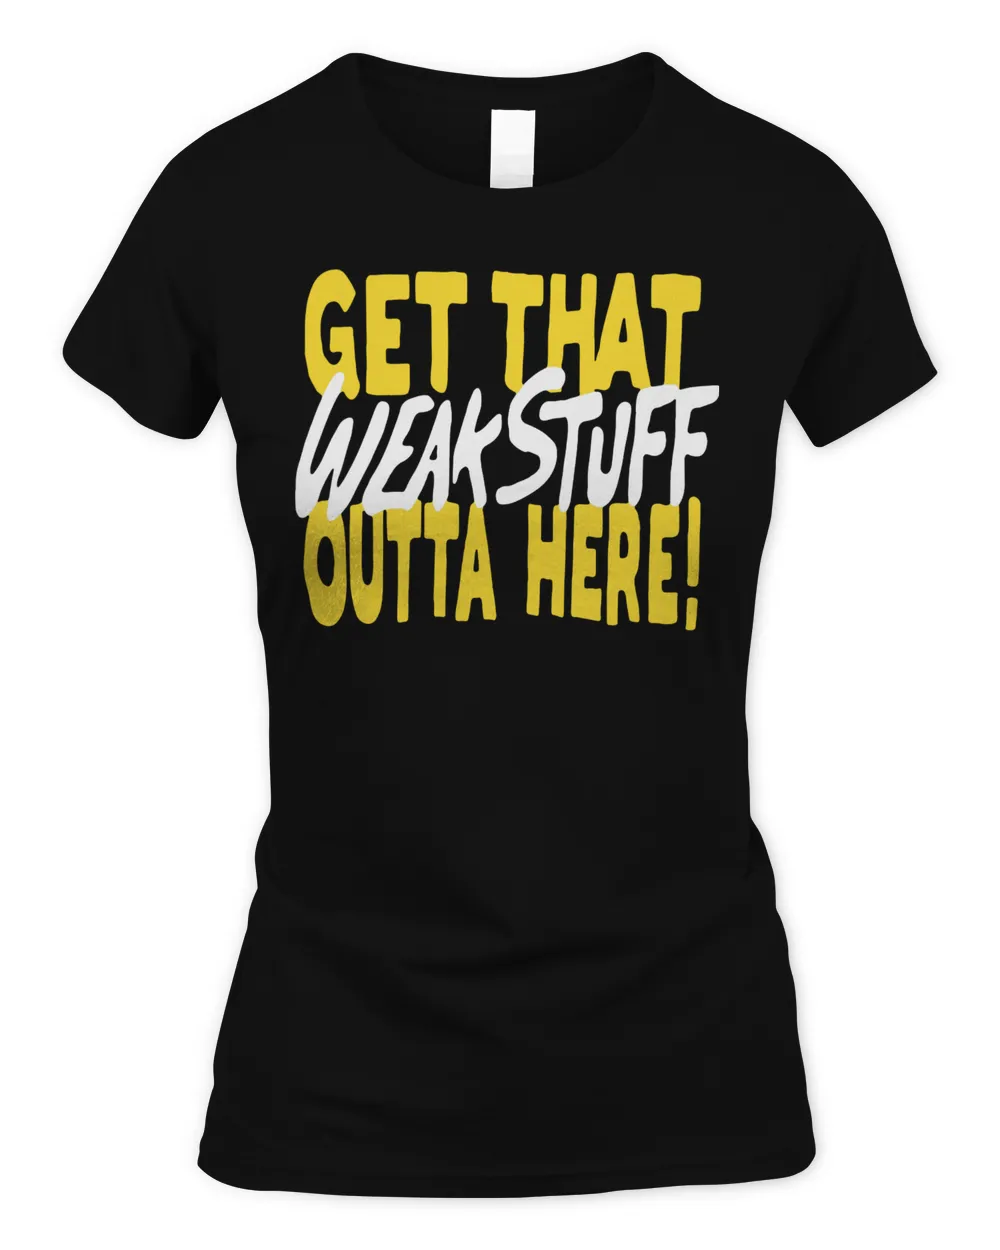 Official Get that weak stuff outta here T-shirt Women's Soft Style Fitted T-Shirt black 